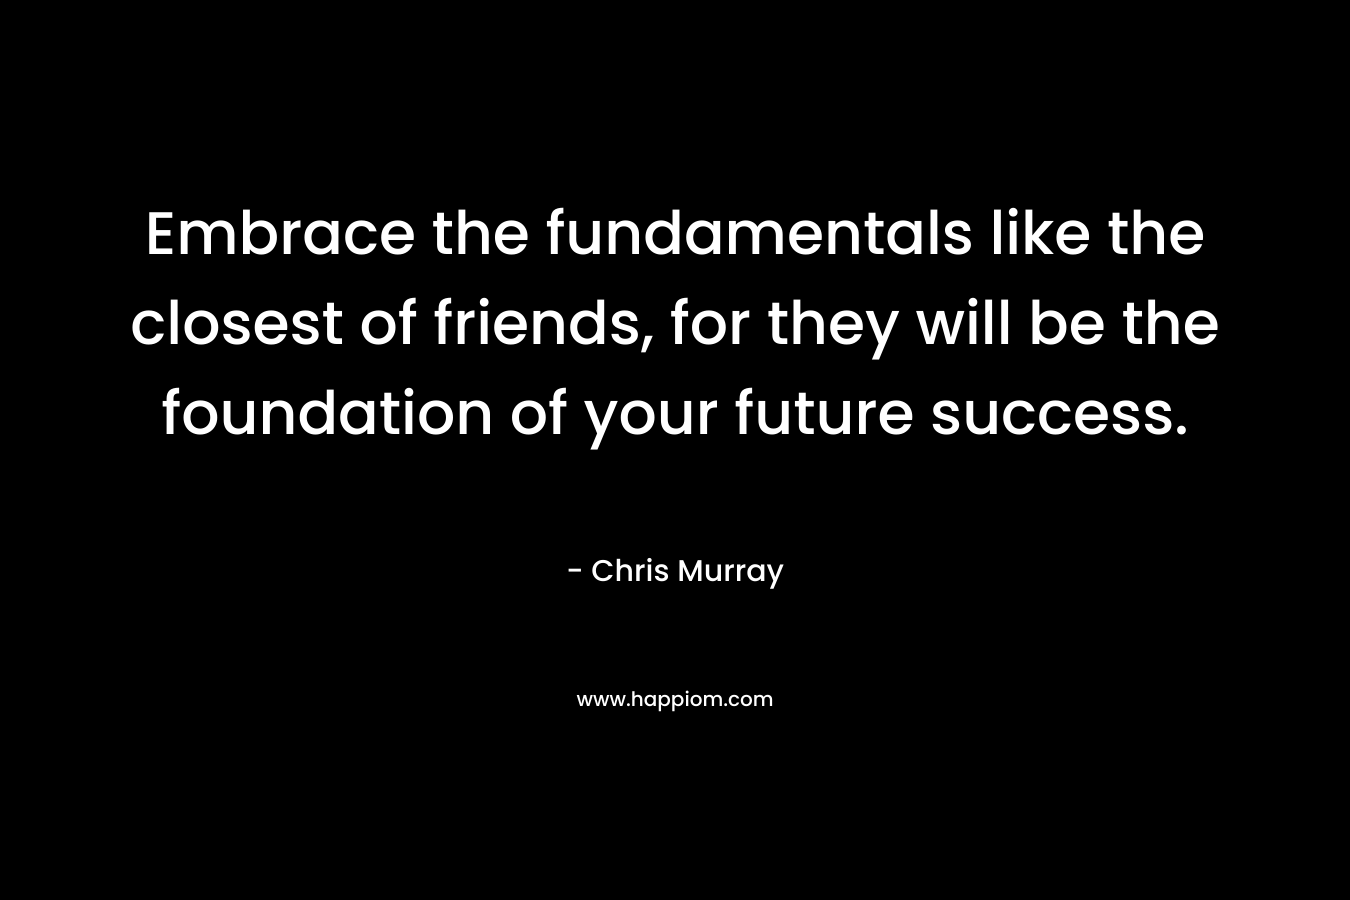 Embrace the fundamentals like the closest of friends, for they will be the foundation of your future success.